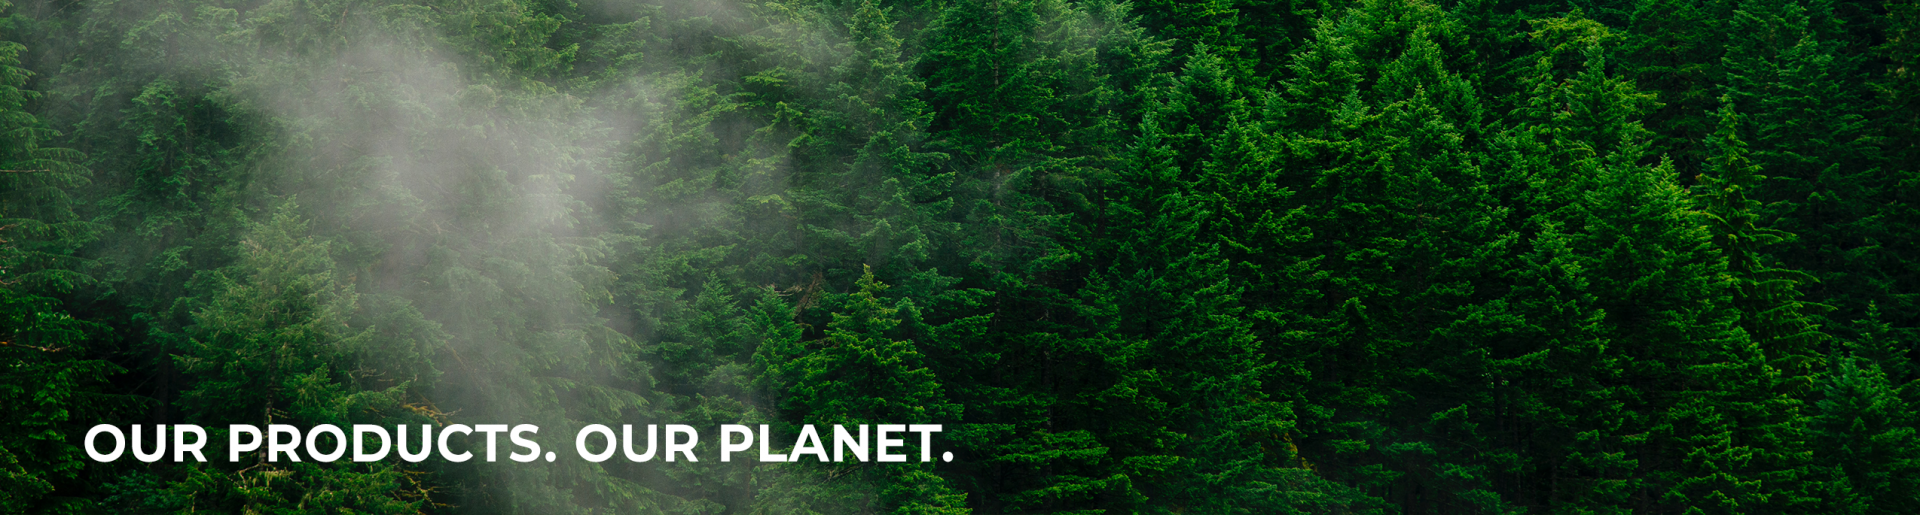 Our products. Our planet.